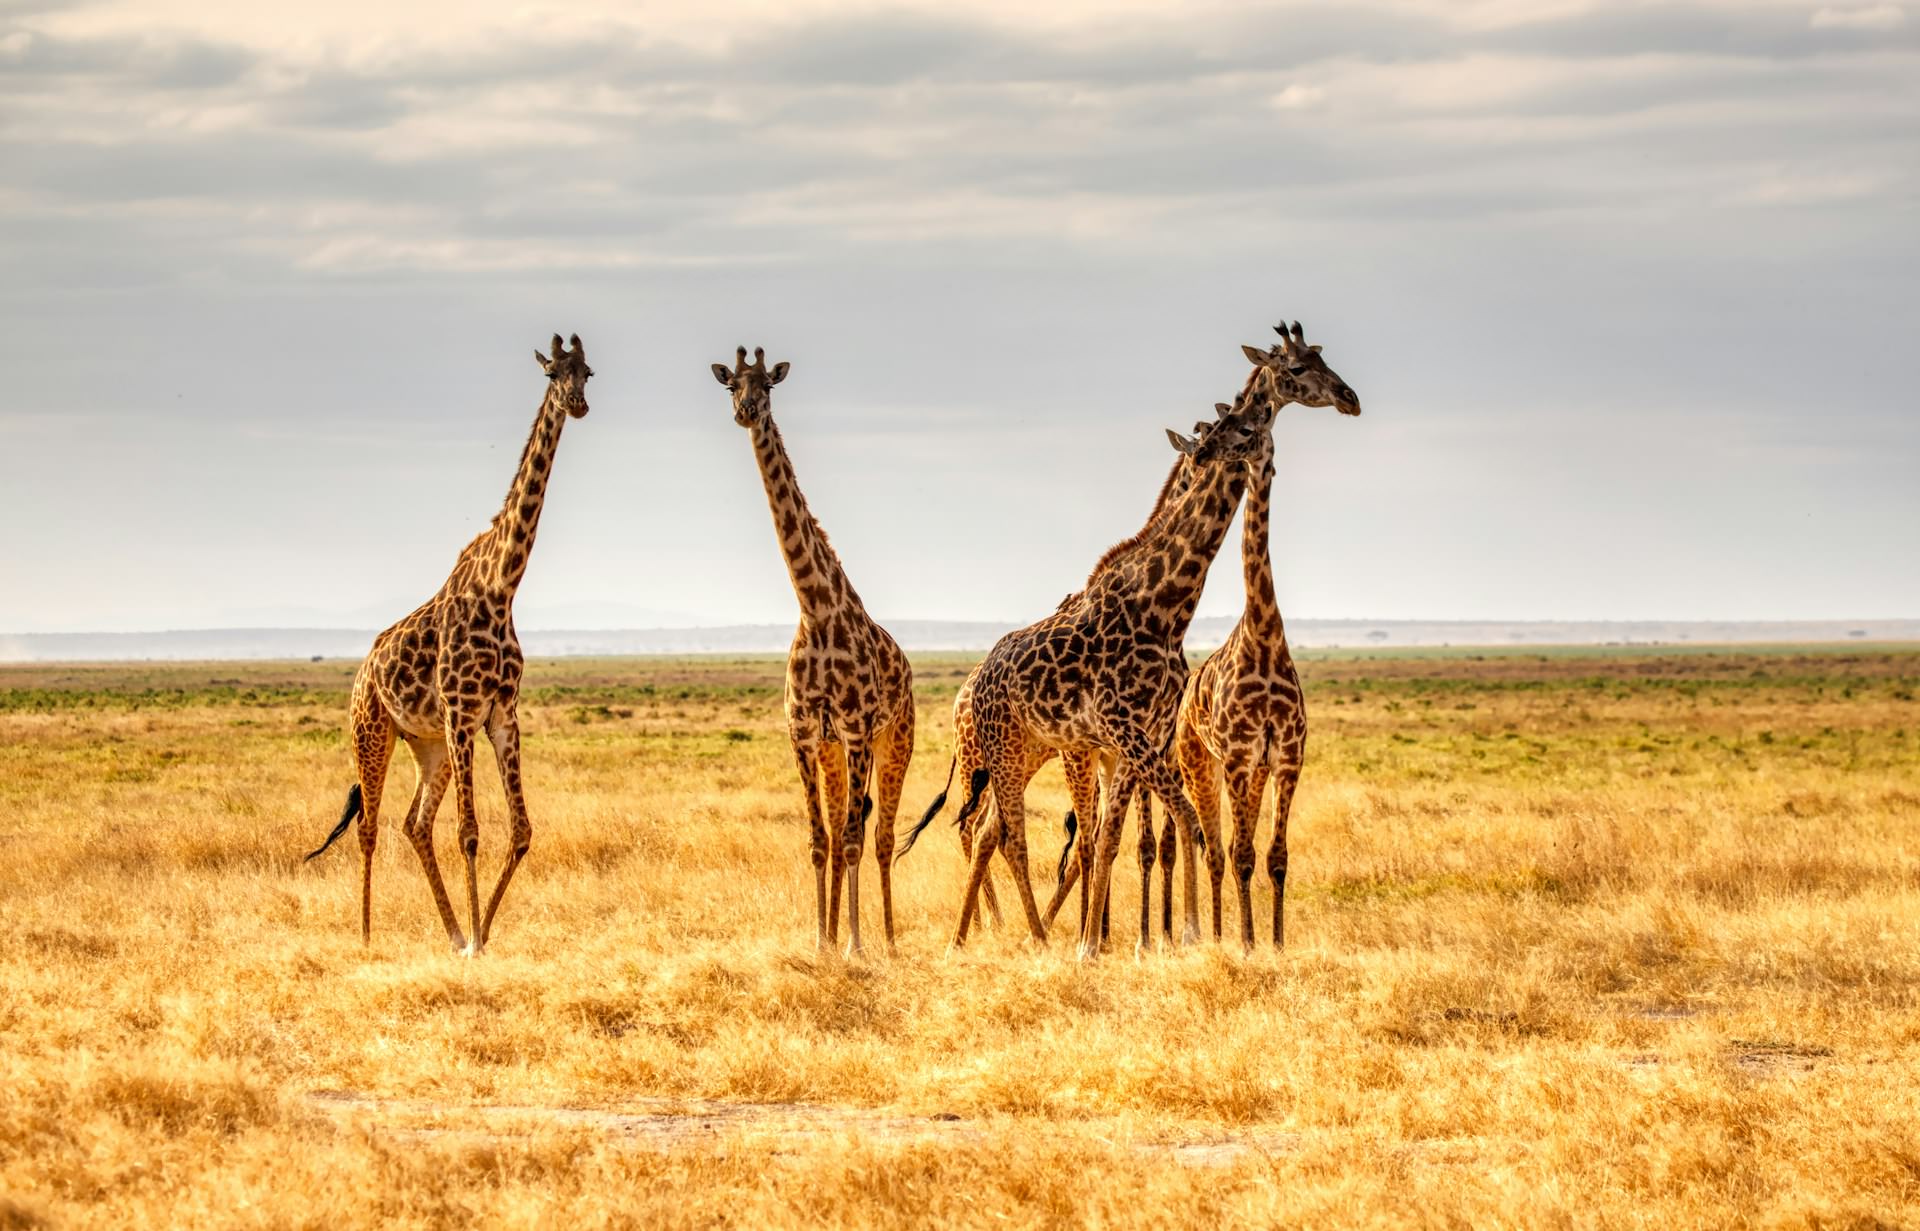 Giraffes are 30 times more likely to be struck by lightning than humans. Their towering height and four-legged stance make them vulnerable to both direct strikes and ground currents.